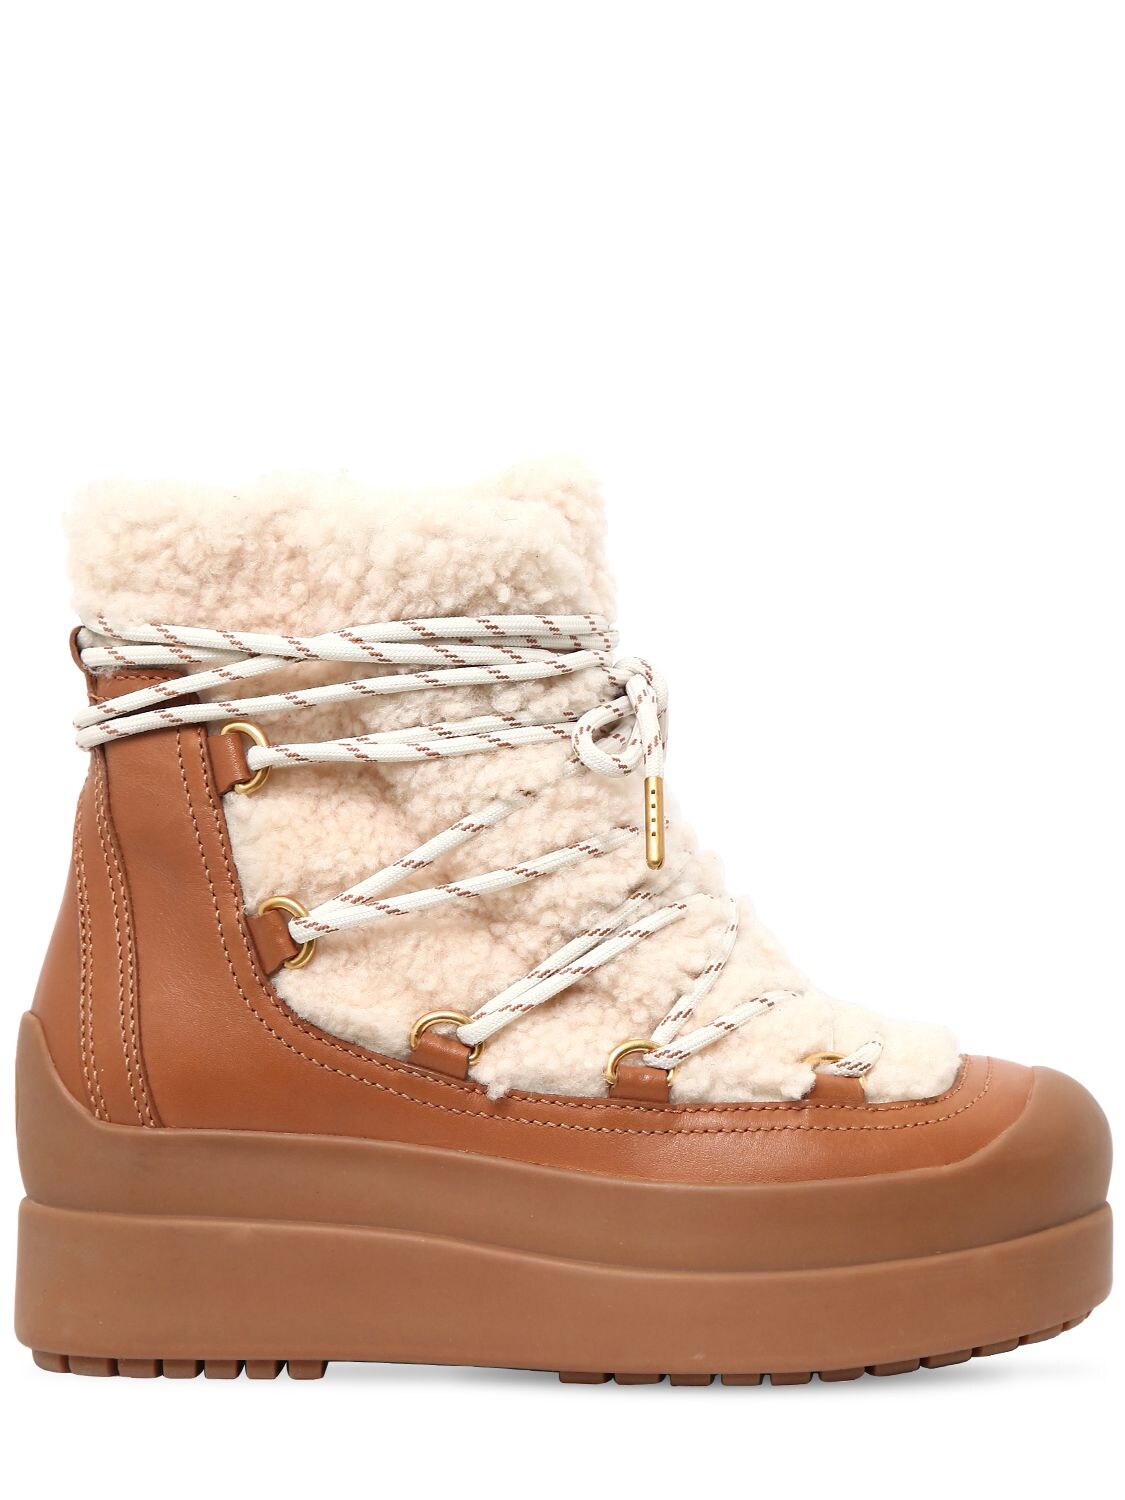 Shop Tory Burch 60mm Courtney Shearling & Leather Boots In Beige